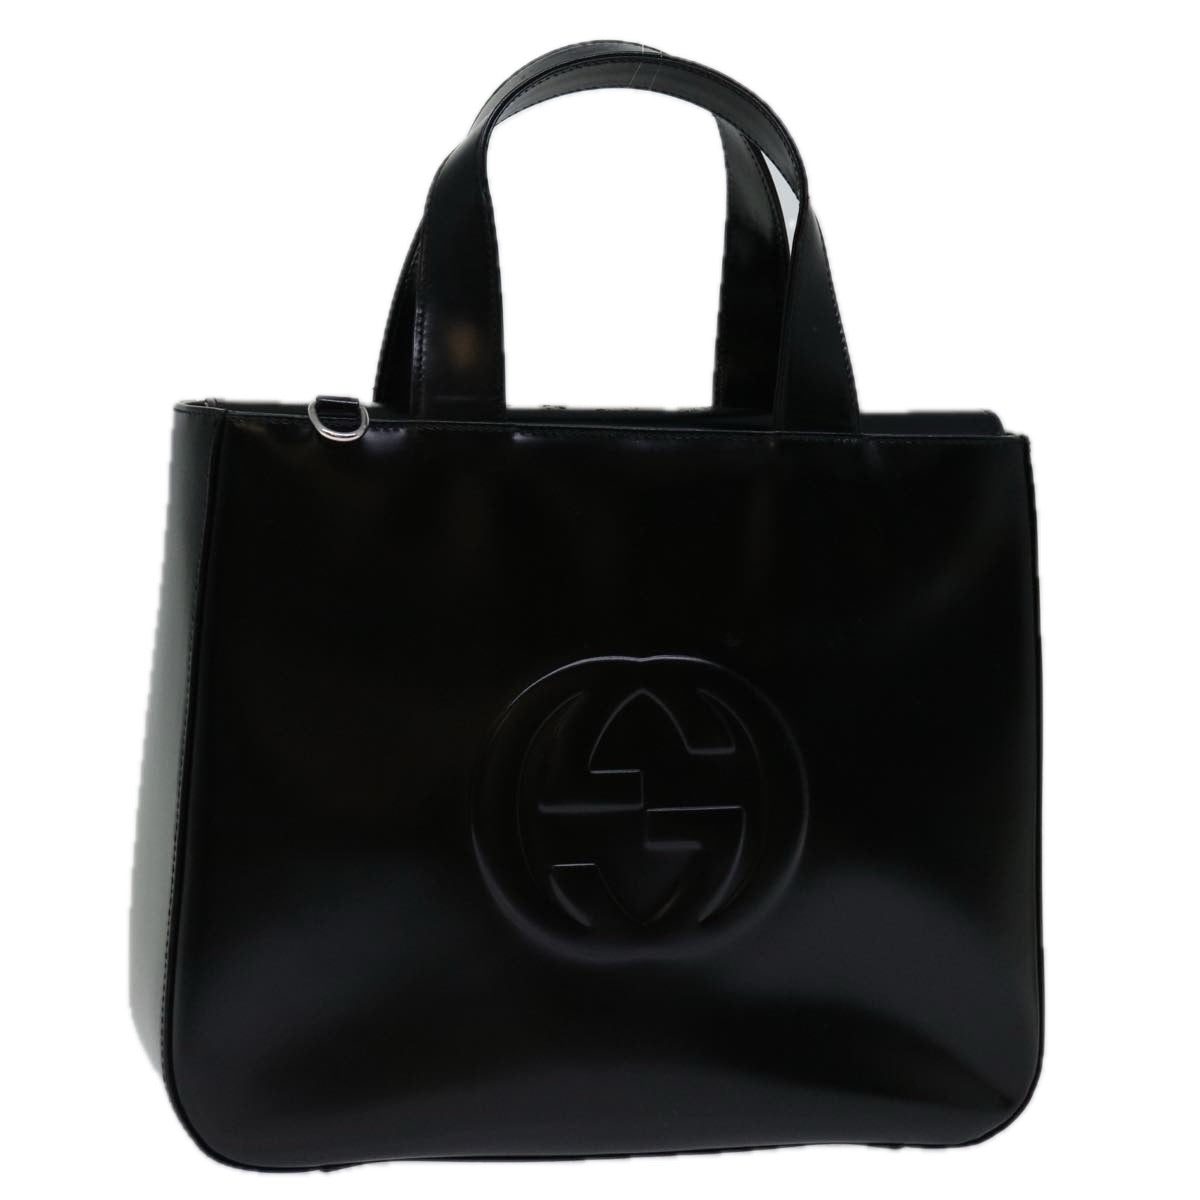 GUCCI Hand Bag Patent leather Black 000 1013 0504 Auth ep3889